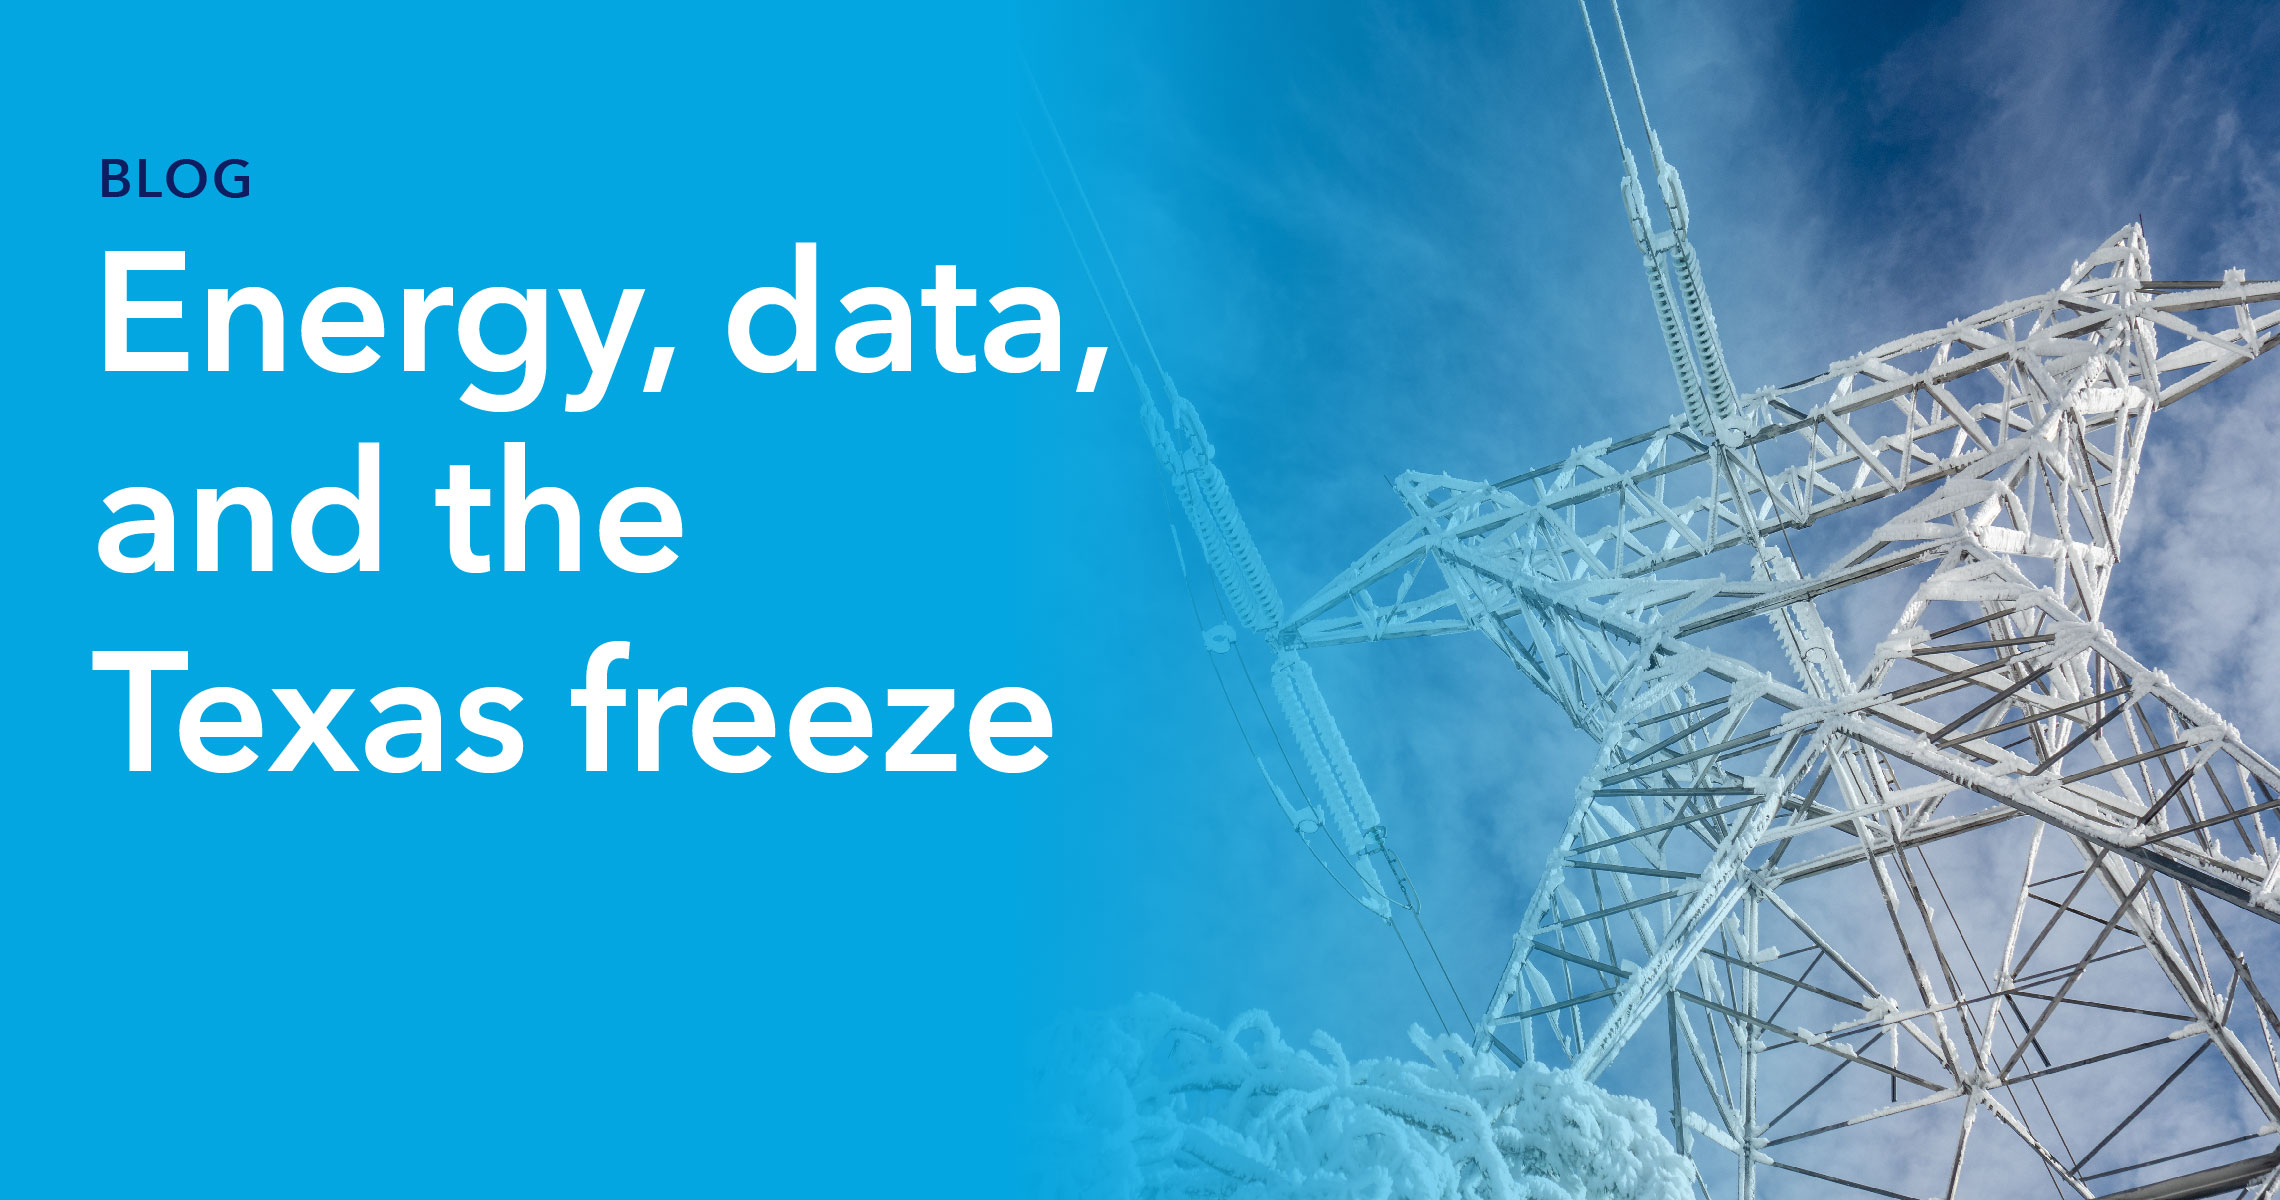 Blog Header - Energy, data, and the Texas freeze